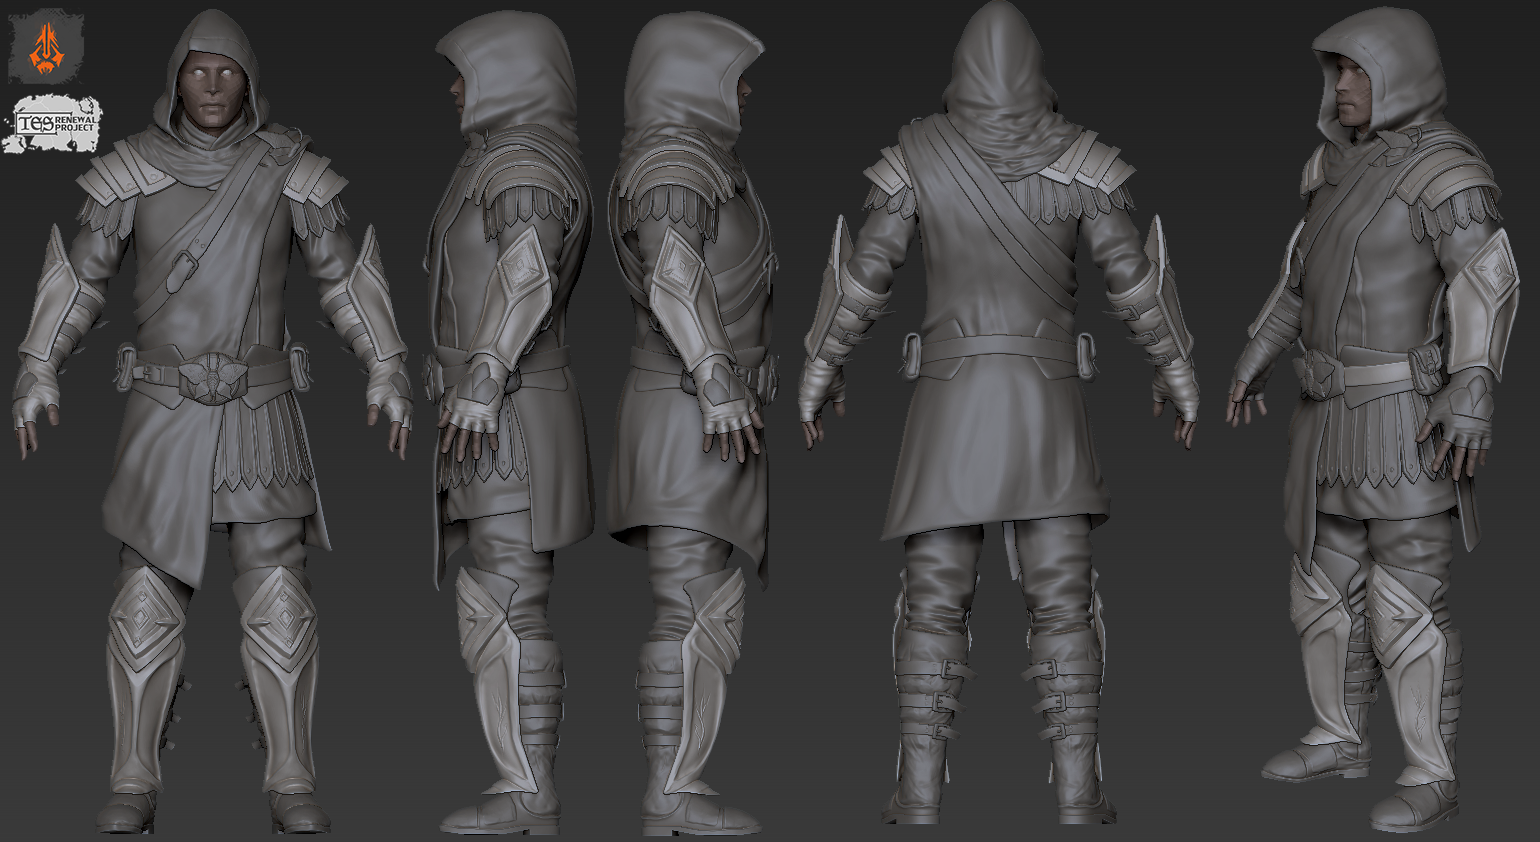 skywind_imperial_battlemage_wip_by_executex-d7ktb0b.png